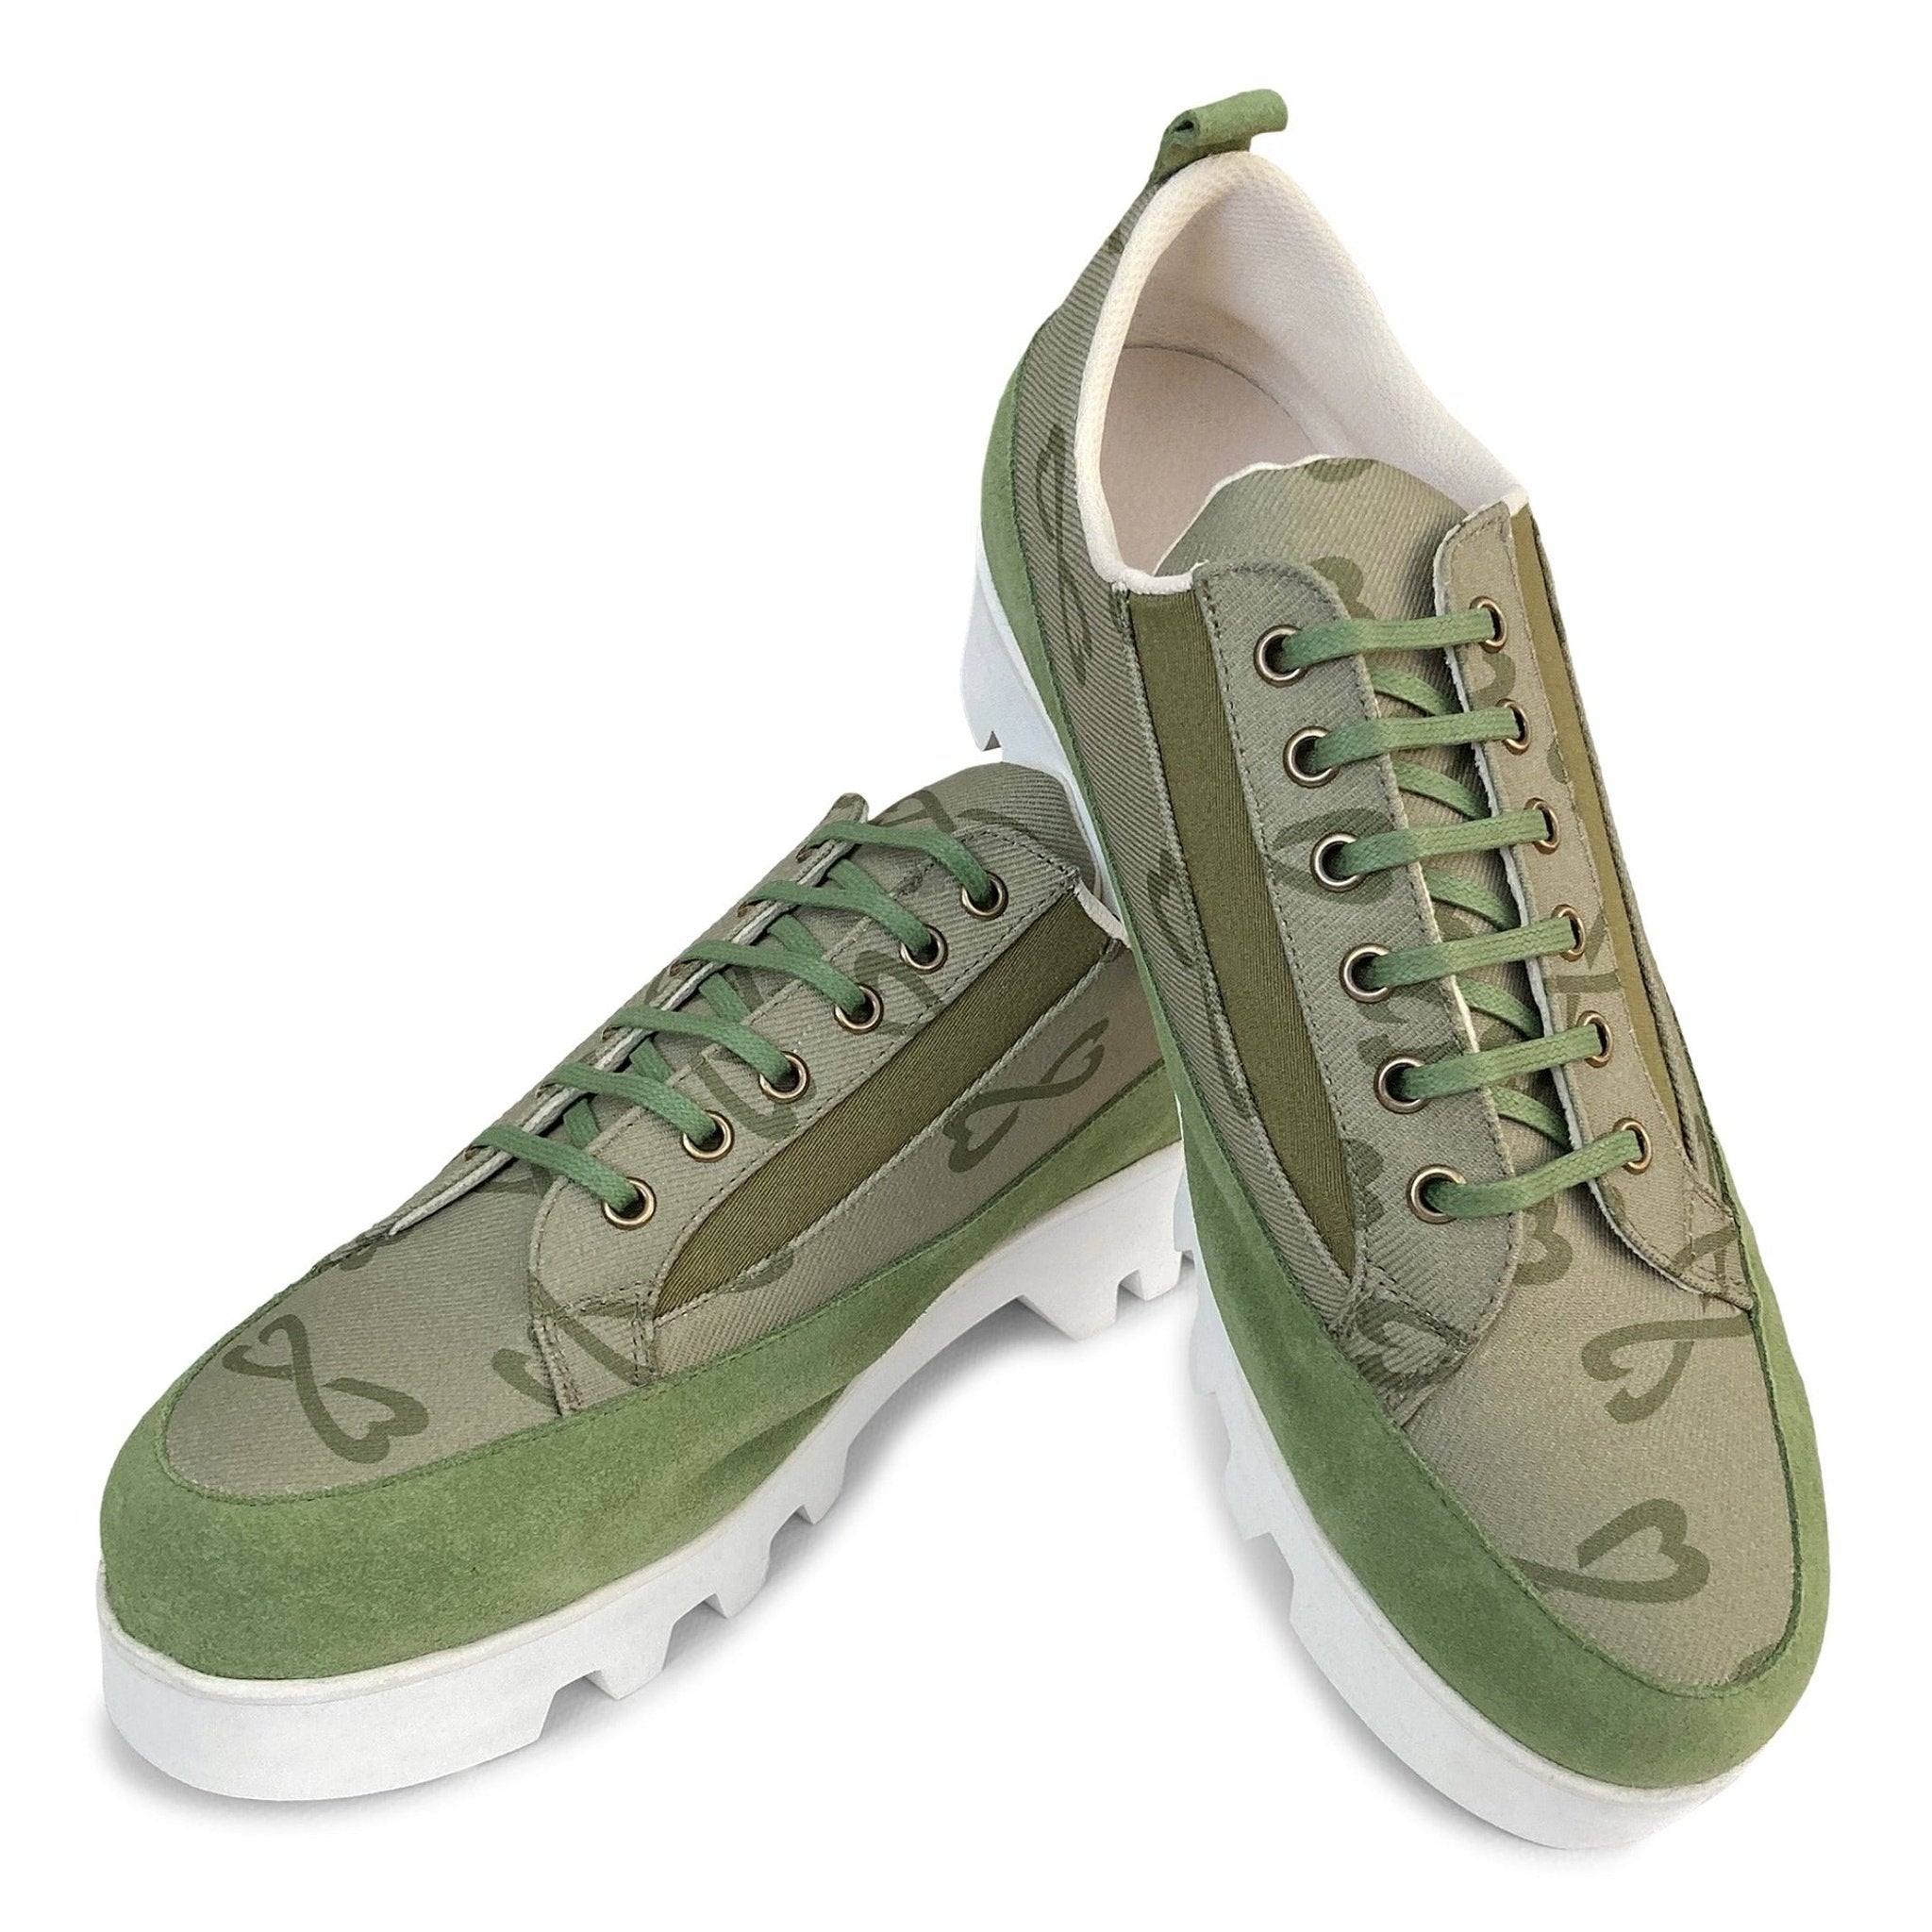 pair of green canvas suede sneaker large sizes